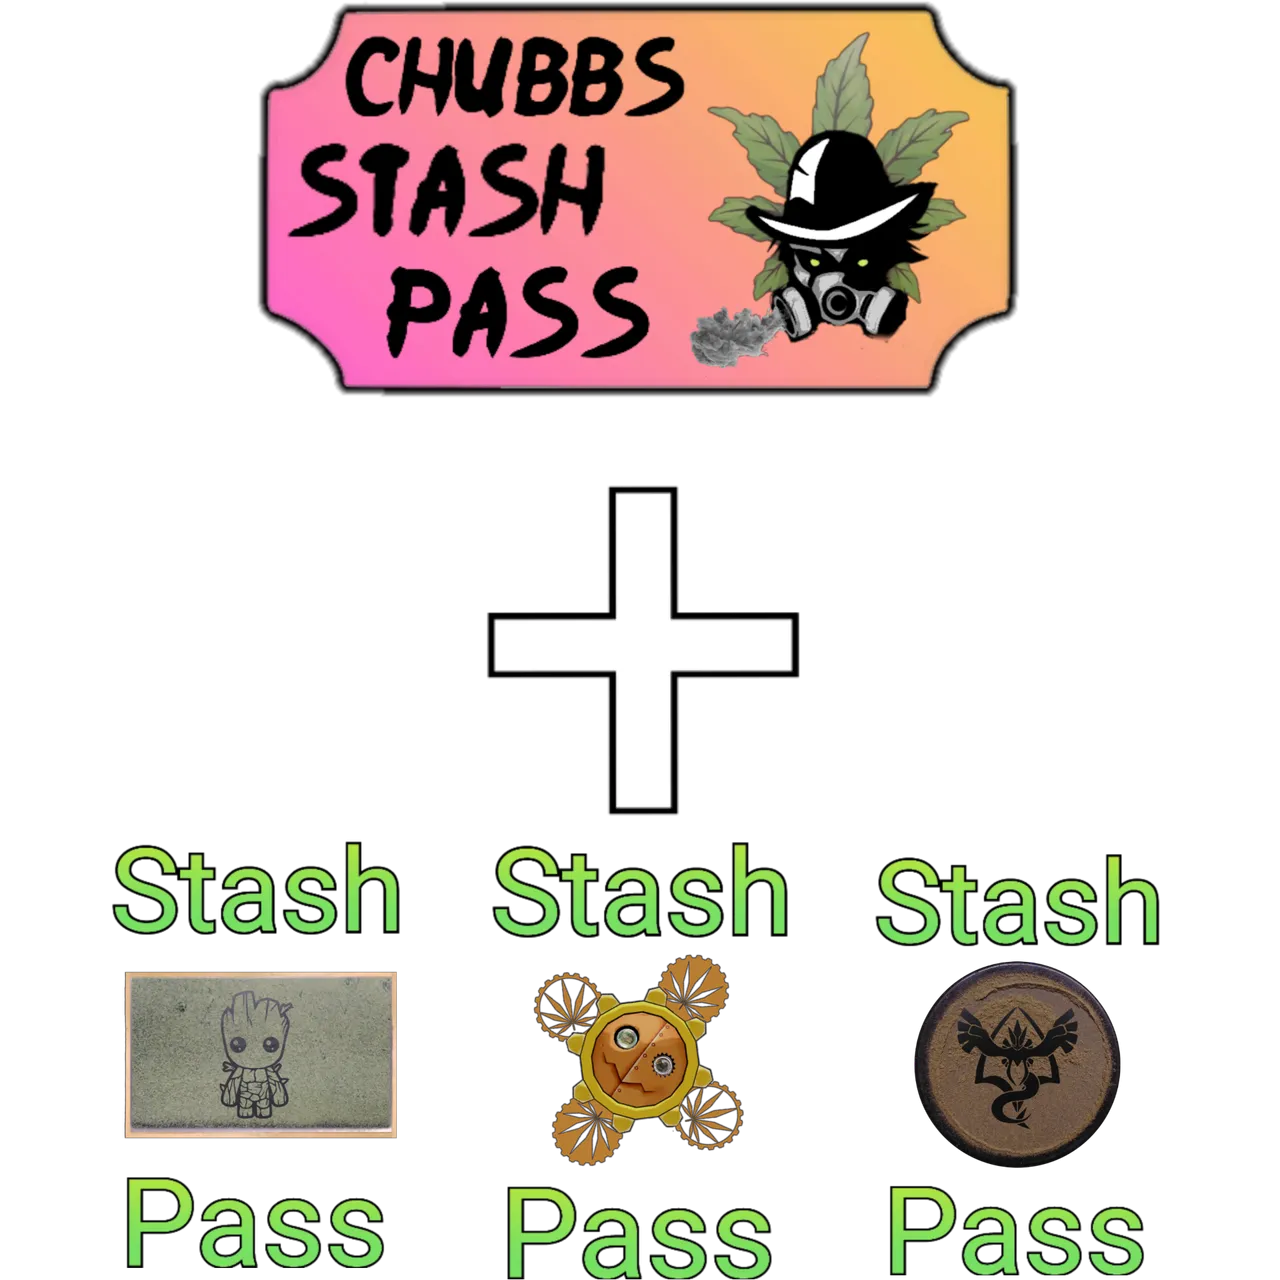 stash_pass_instructions.png